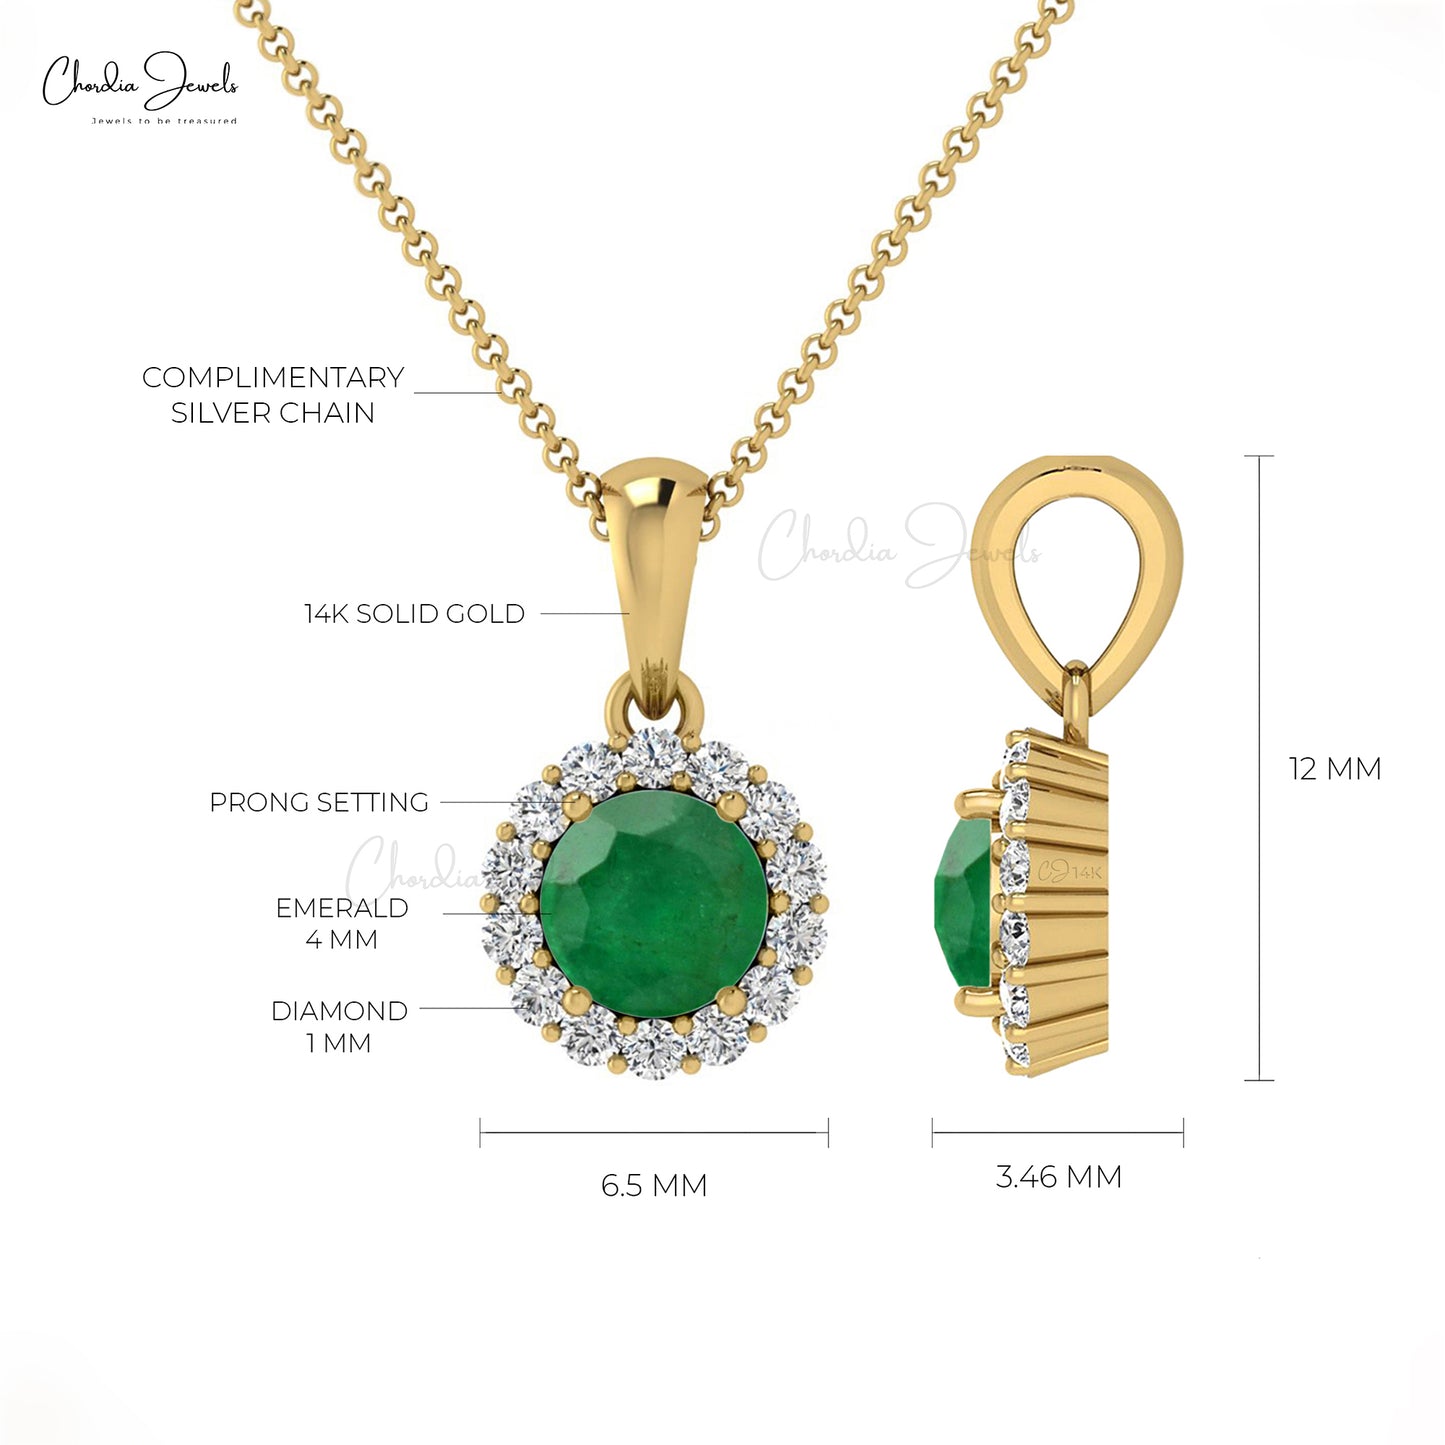 Load image into Gallery viewer, Genuine Diamond Halo Emerald Pendant In 14k Real Gold May Birthstone Handcrafted Pendant
